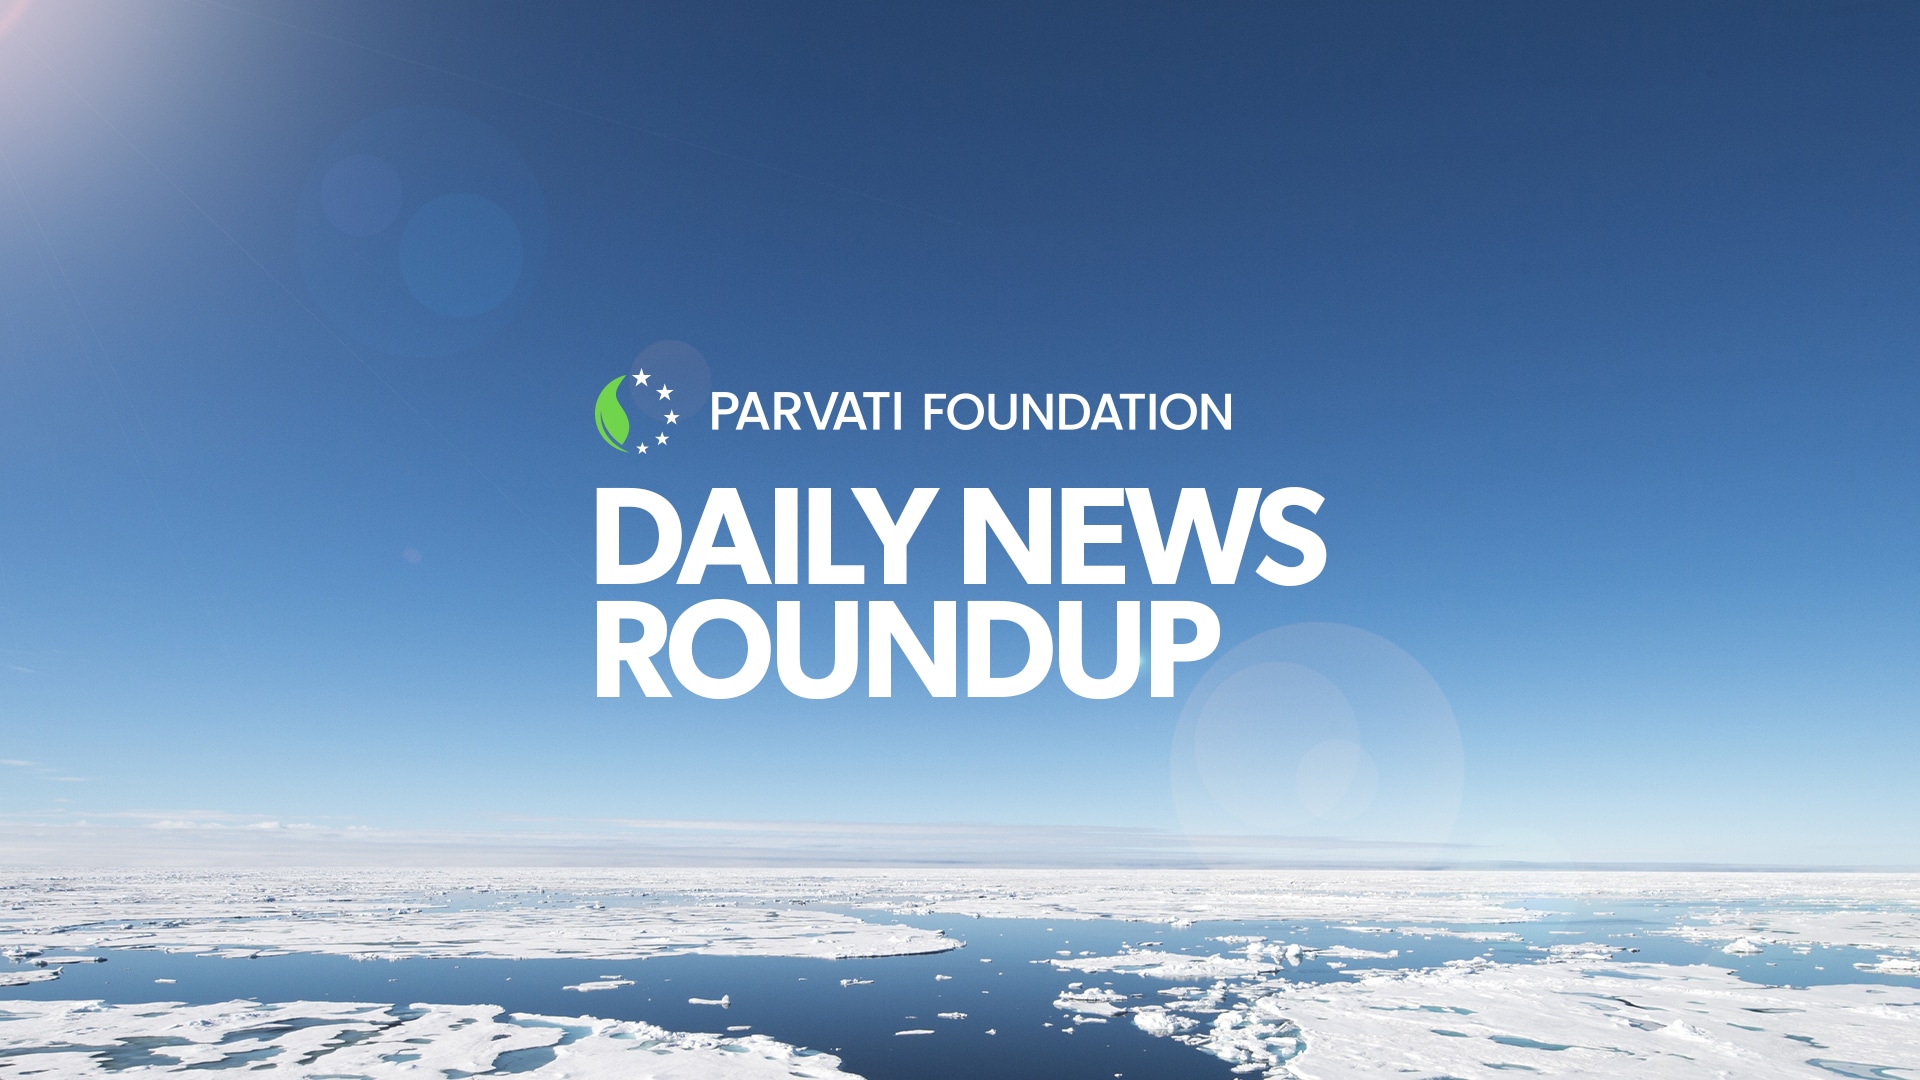 Parvati Foundation Daily News Roundup. Find out why we need MAPS immediately for the sake of all life.